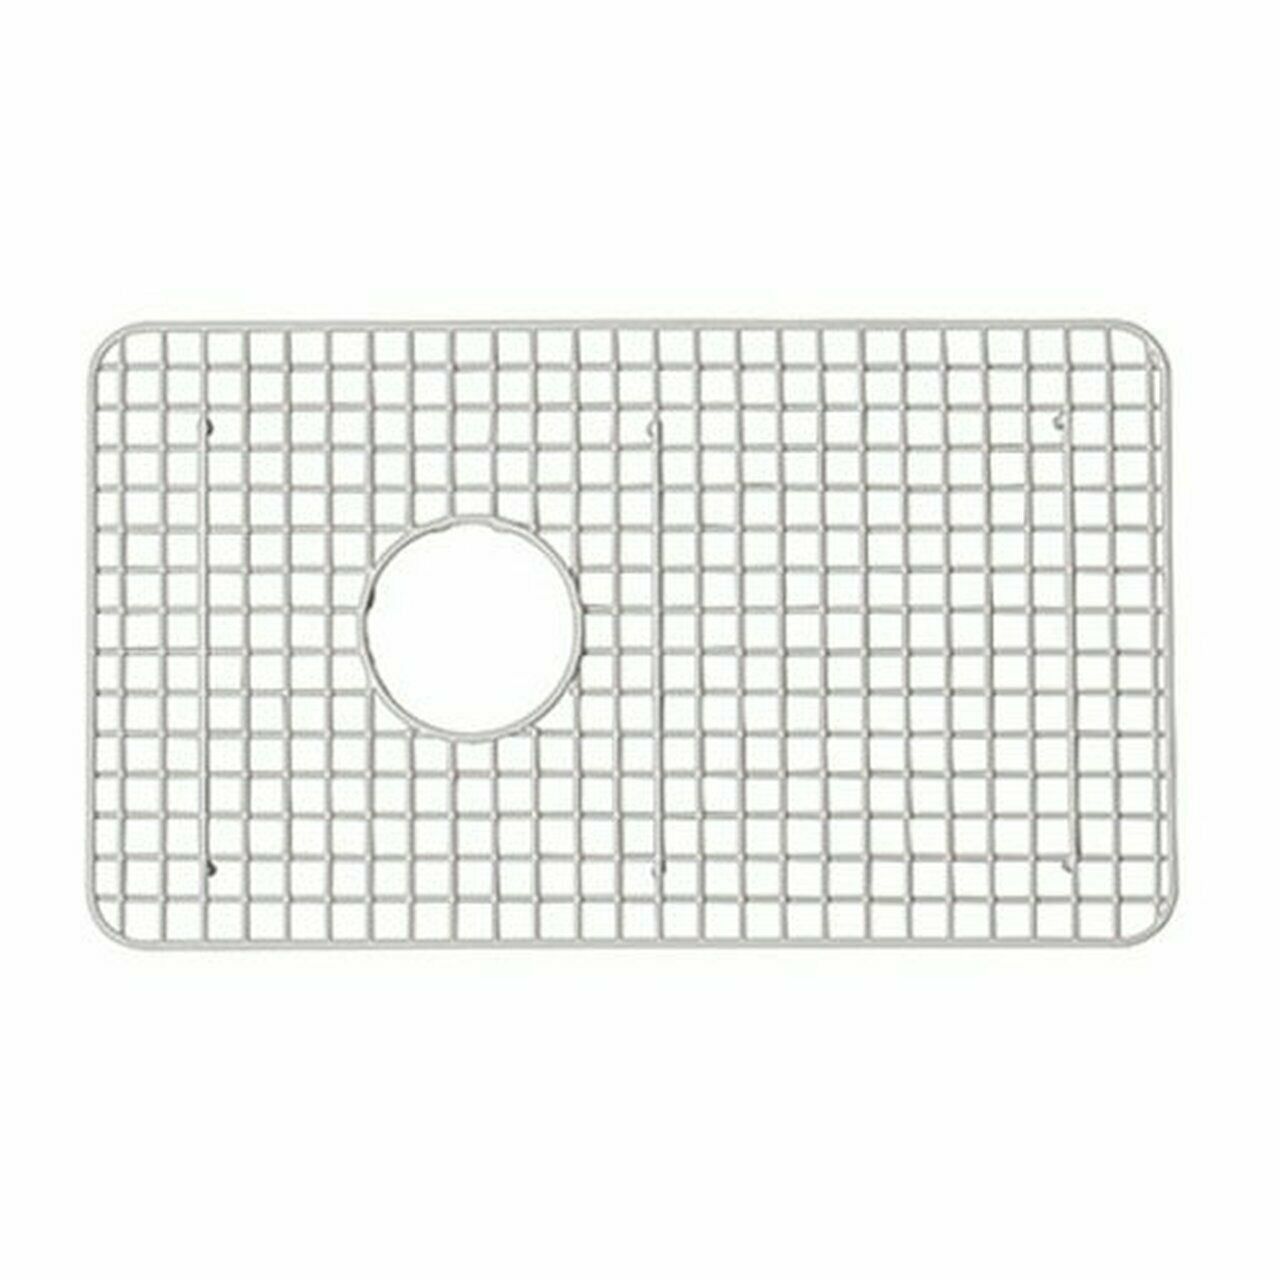 New Rohl Wsg6307ss Stainless Steel Wire Sink Basin Grid For Rohl Allia 6307